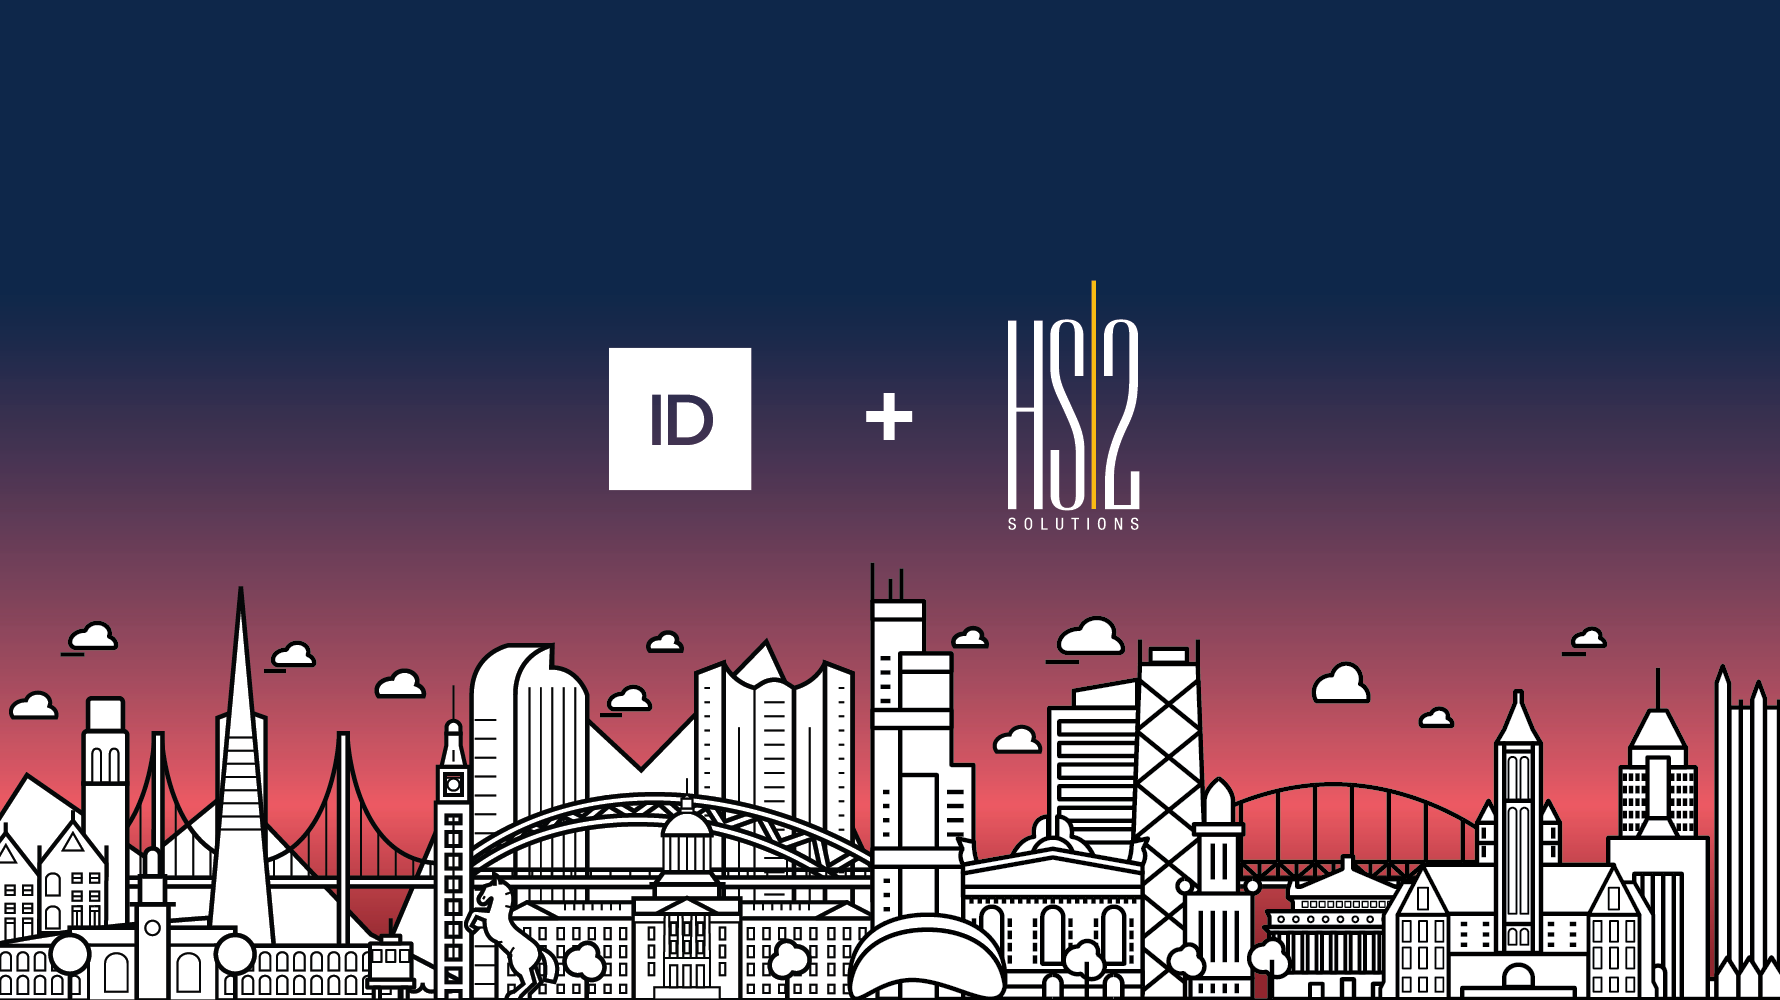 HS2 Grows with Infield Digital Acquisition